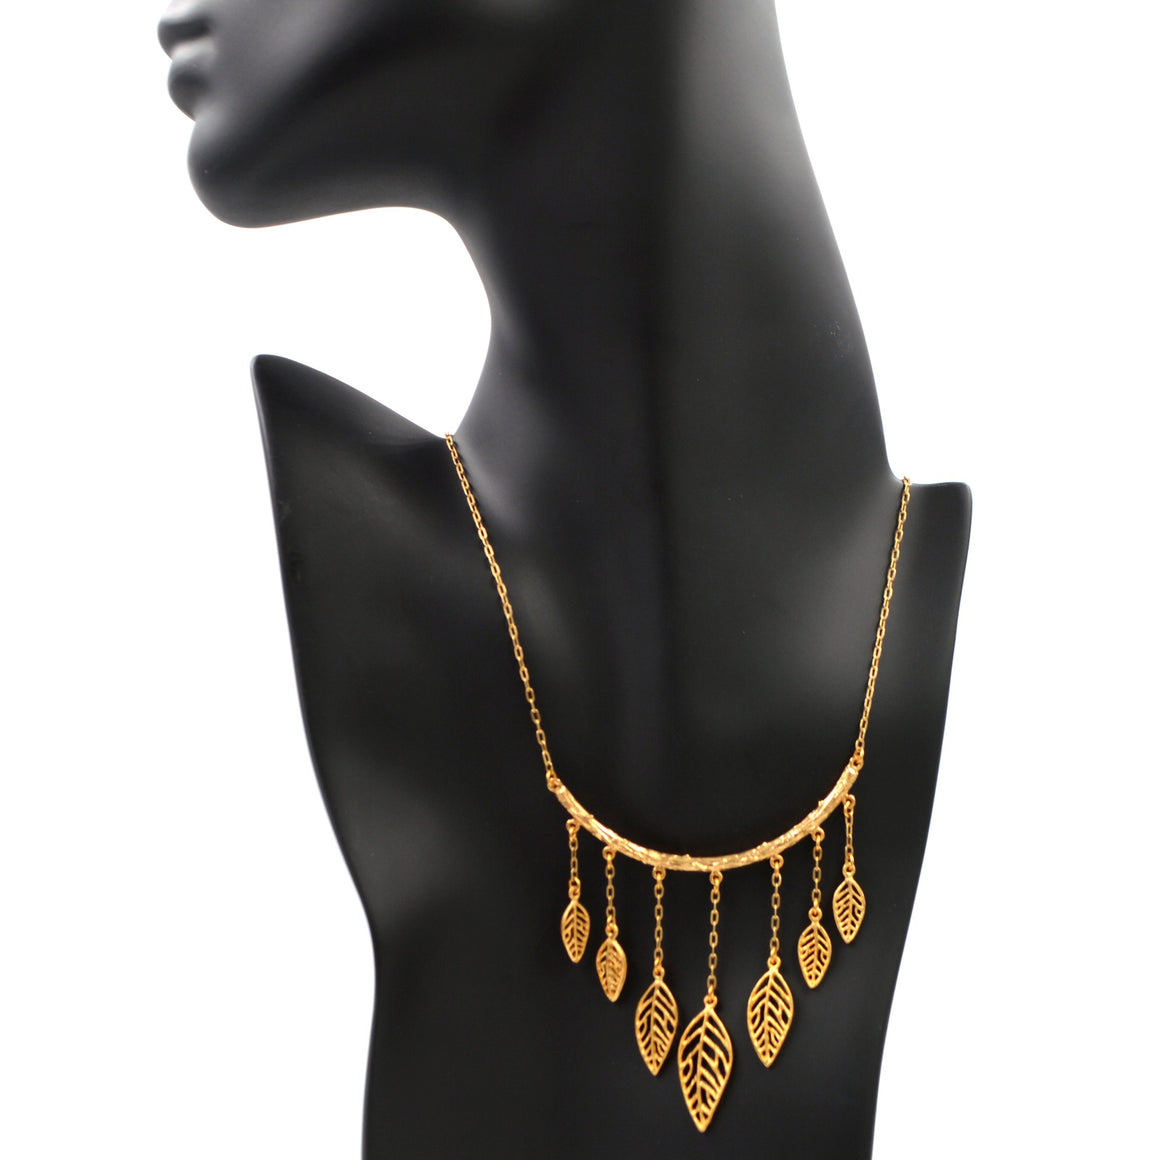 Birch Leaf Collar Necklace - 24K Gold Plated